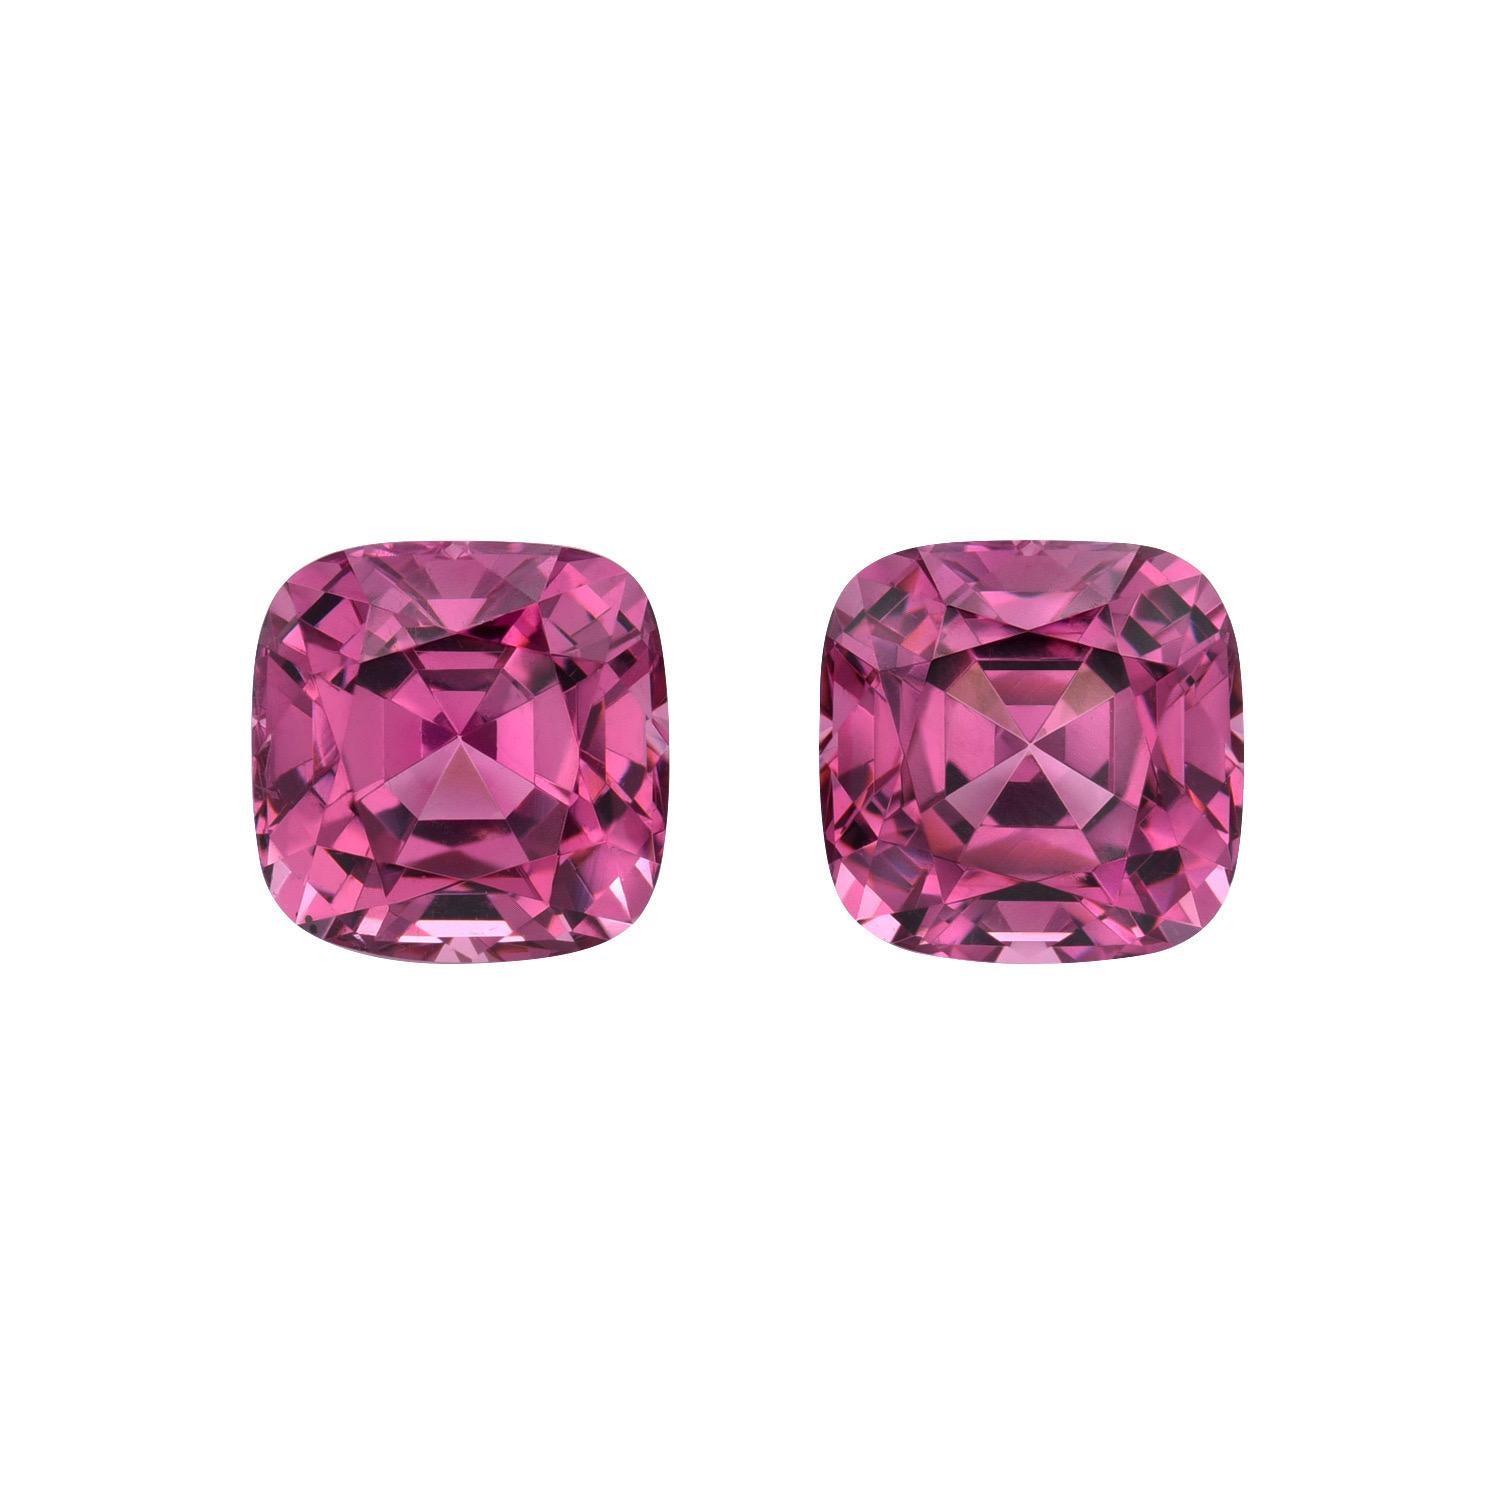 Marvelous mismatched pair of 2.95 carat Malaya Garnet cushions and 6.74 carats Pink Tourmaline cushions, offered loose and unmounted to an exclusive gemstone connoisseur.
Dimensions: Top 6.1 x 6.1 mm. Bottom 9 x 8.1 mm.
Returns are accepted and paid